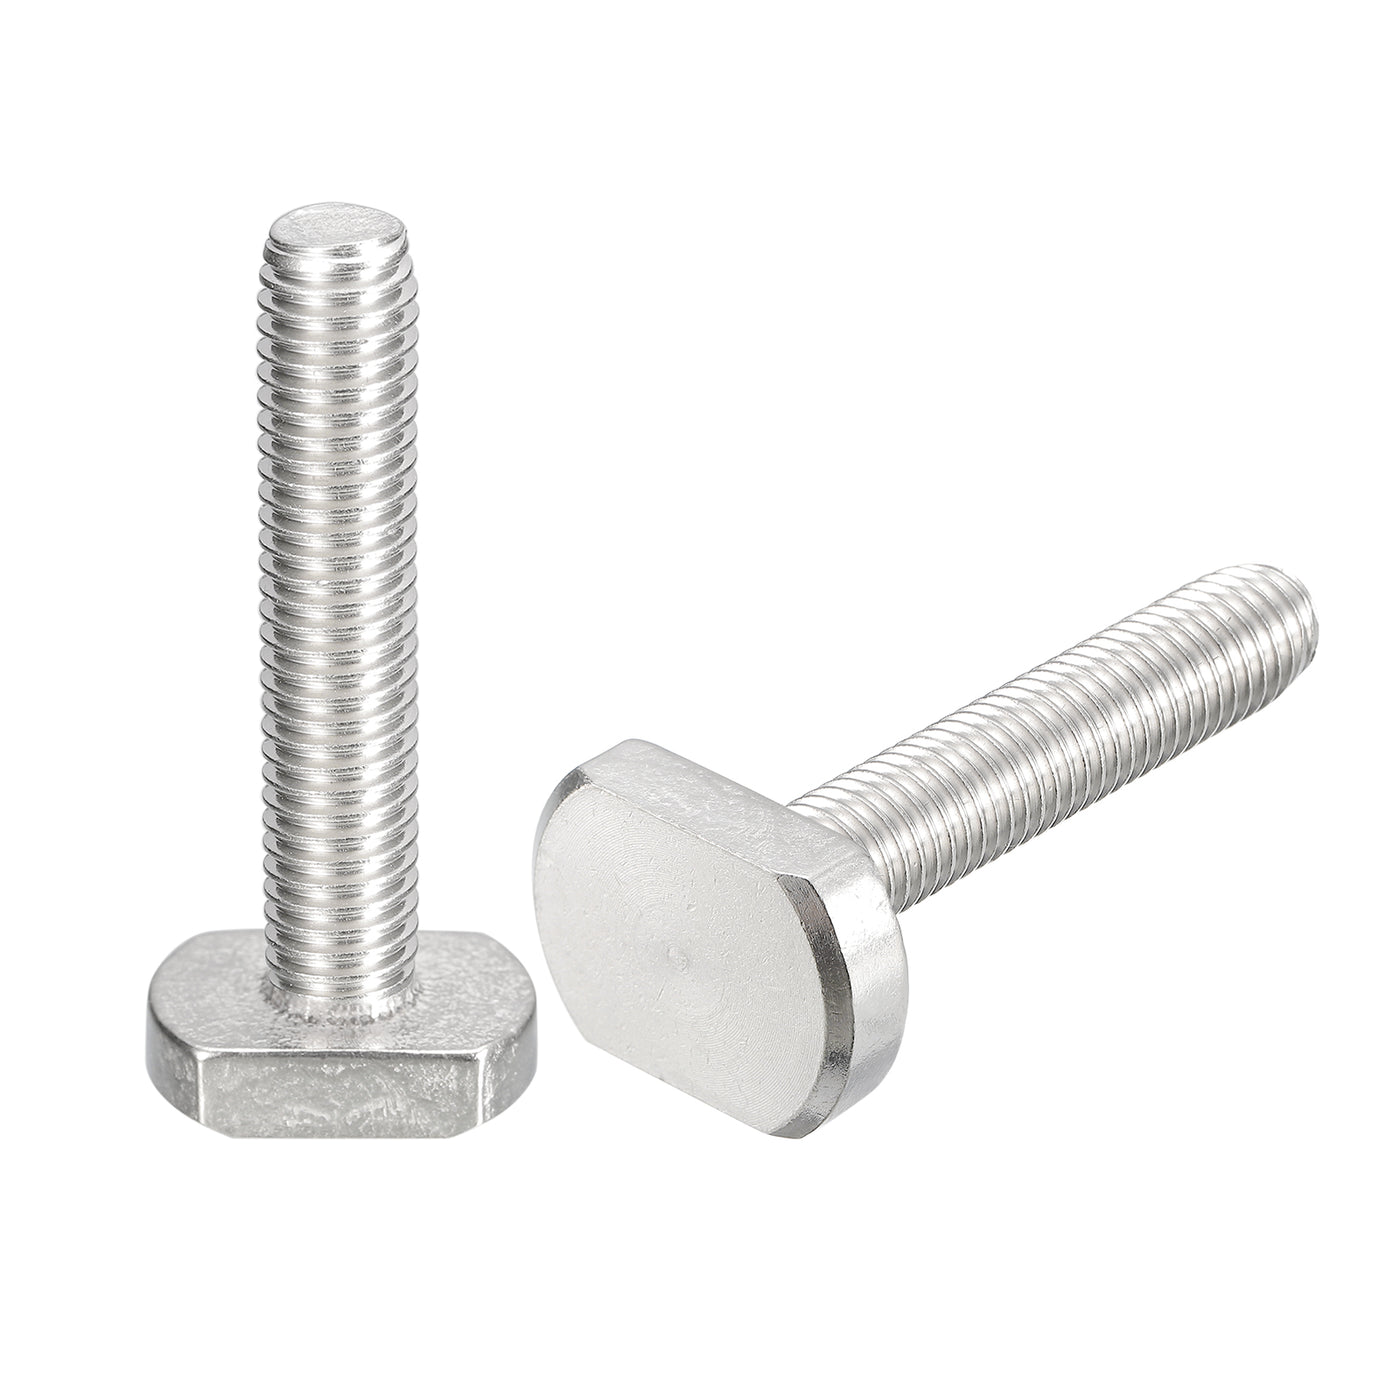 uxcell Uxcell T-Slot Bolts, 2pcs M10x50mm Drop-in Stud Sliding Bolts 304 Stainless Steel